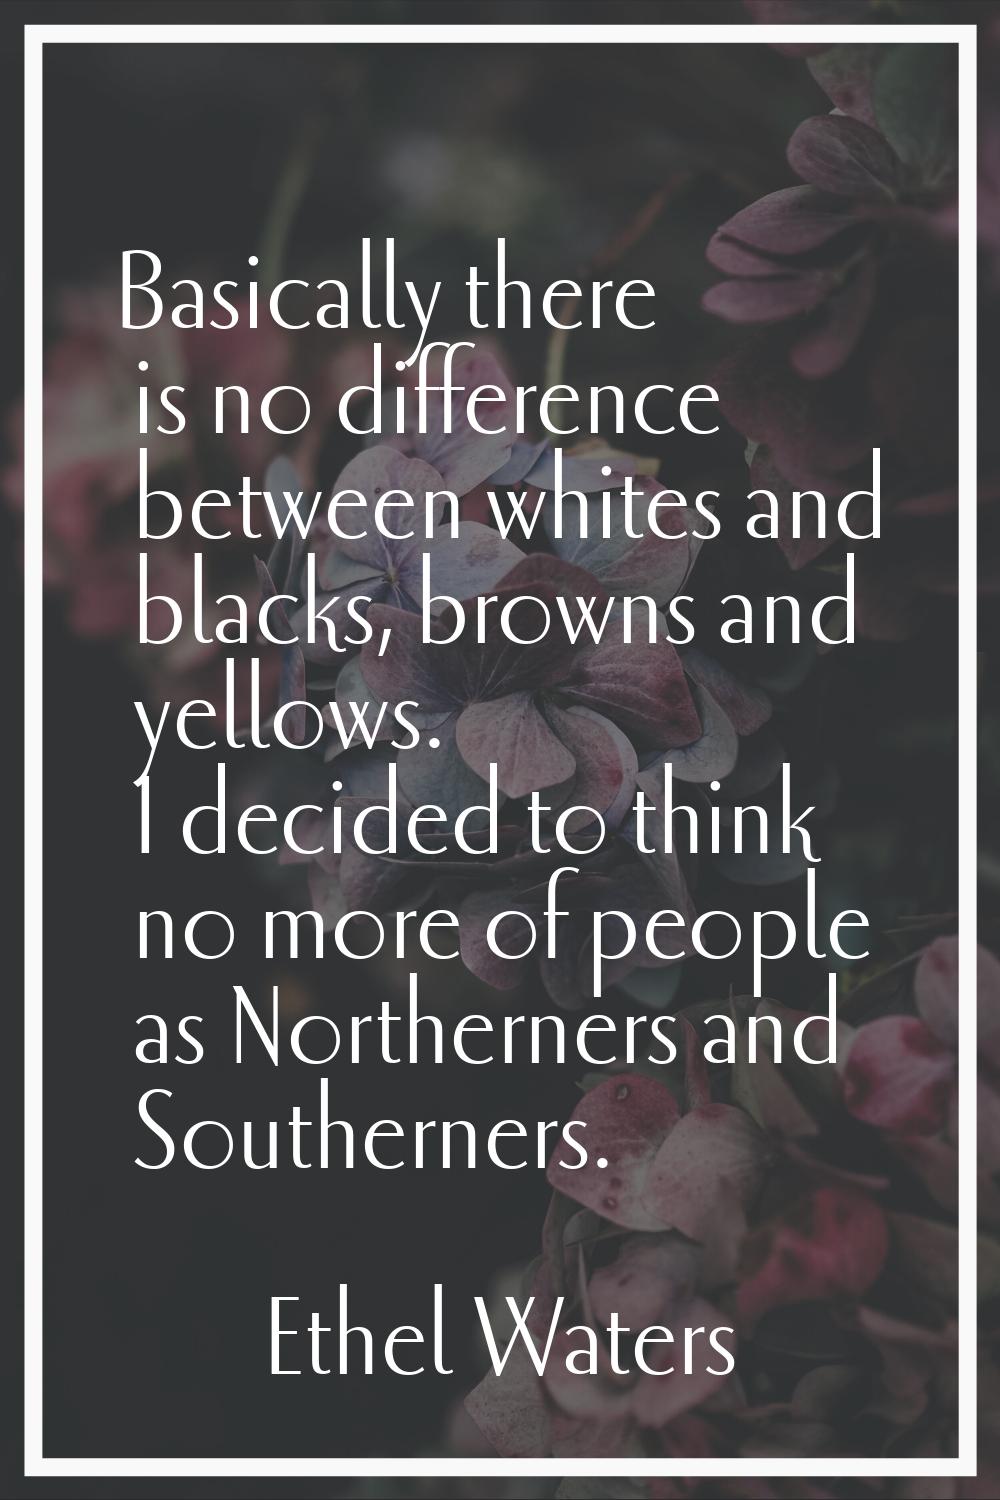 Basically there is no difference between whites and blacks, browns and yellows. I decided to think 